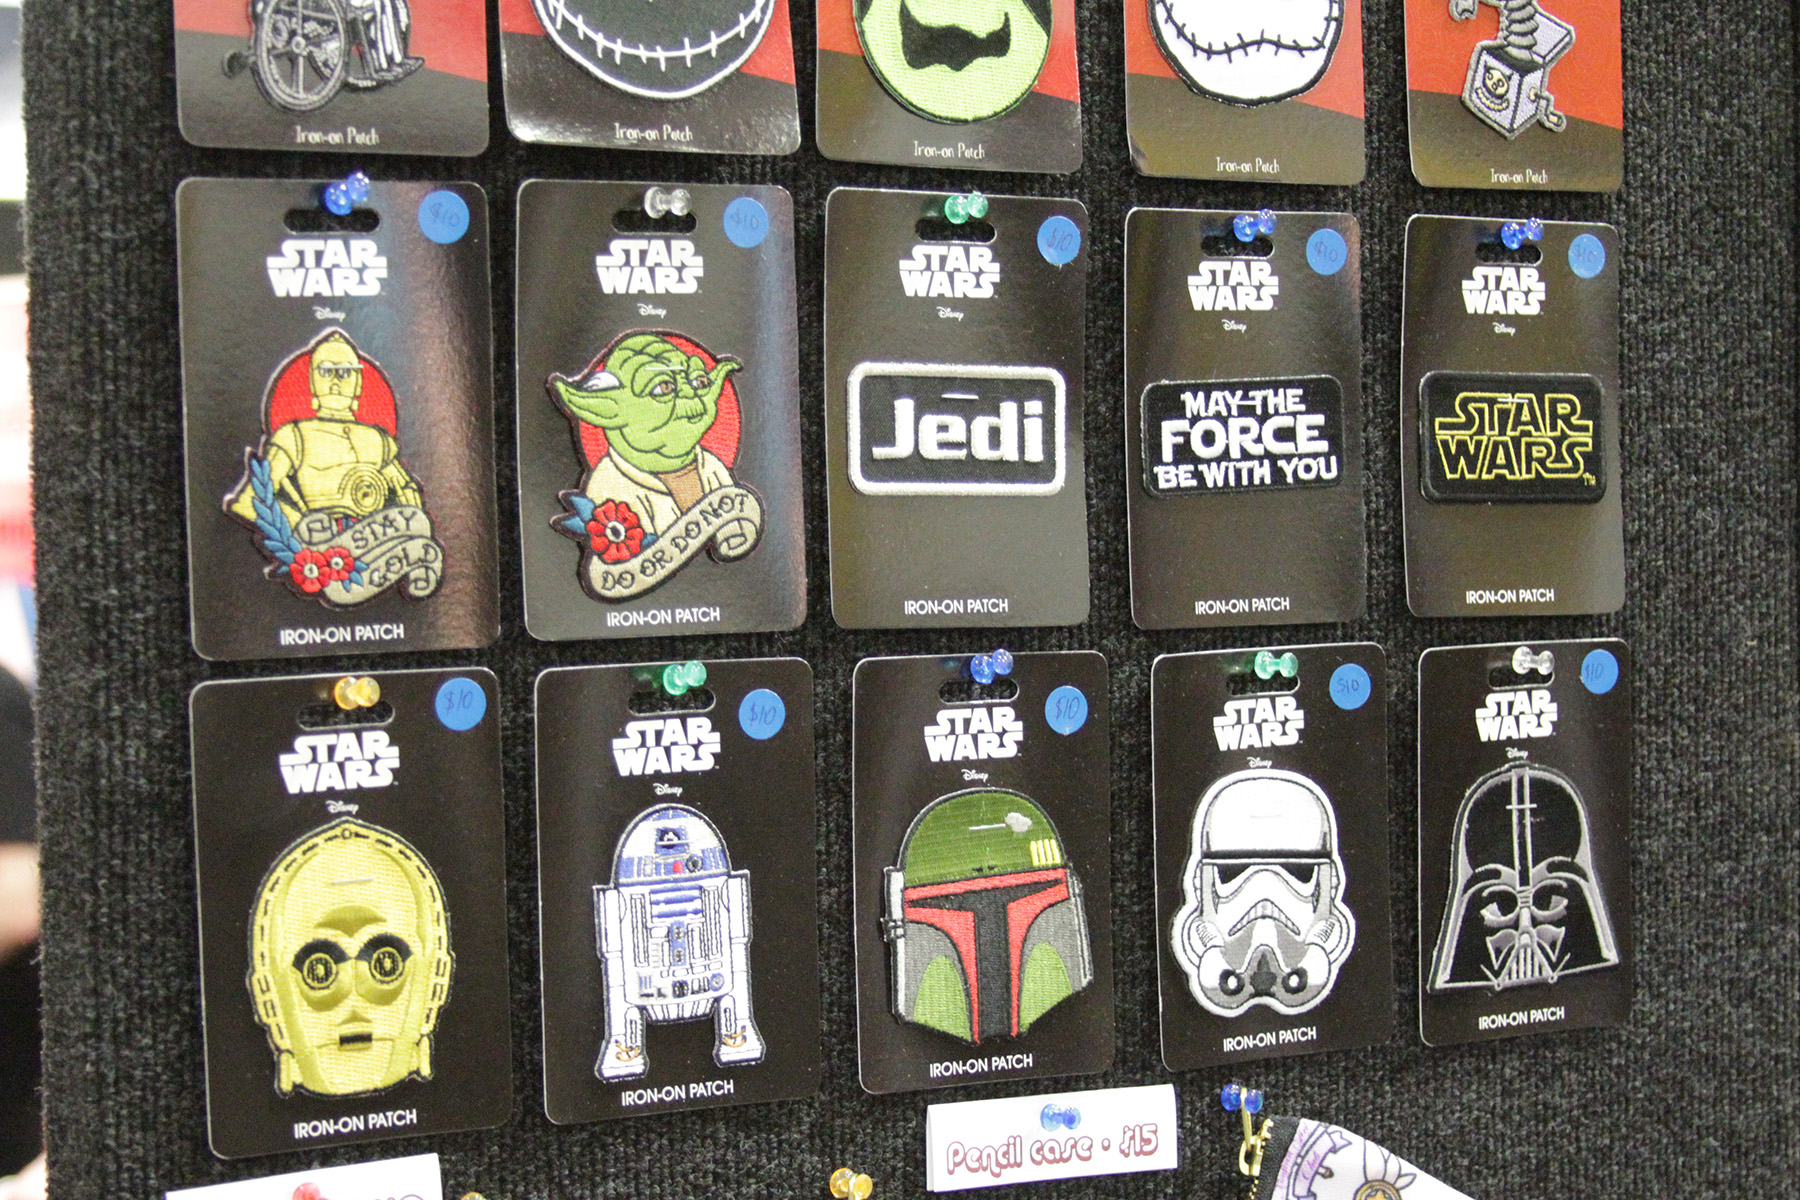 Star Wars fashion at the Geek Boutique booth at Armageddon Expo Auckland 2018